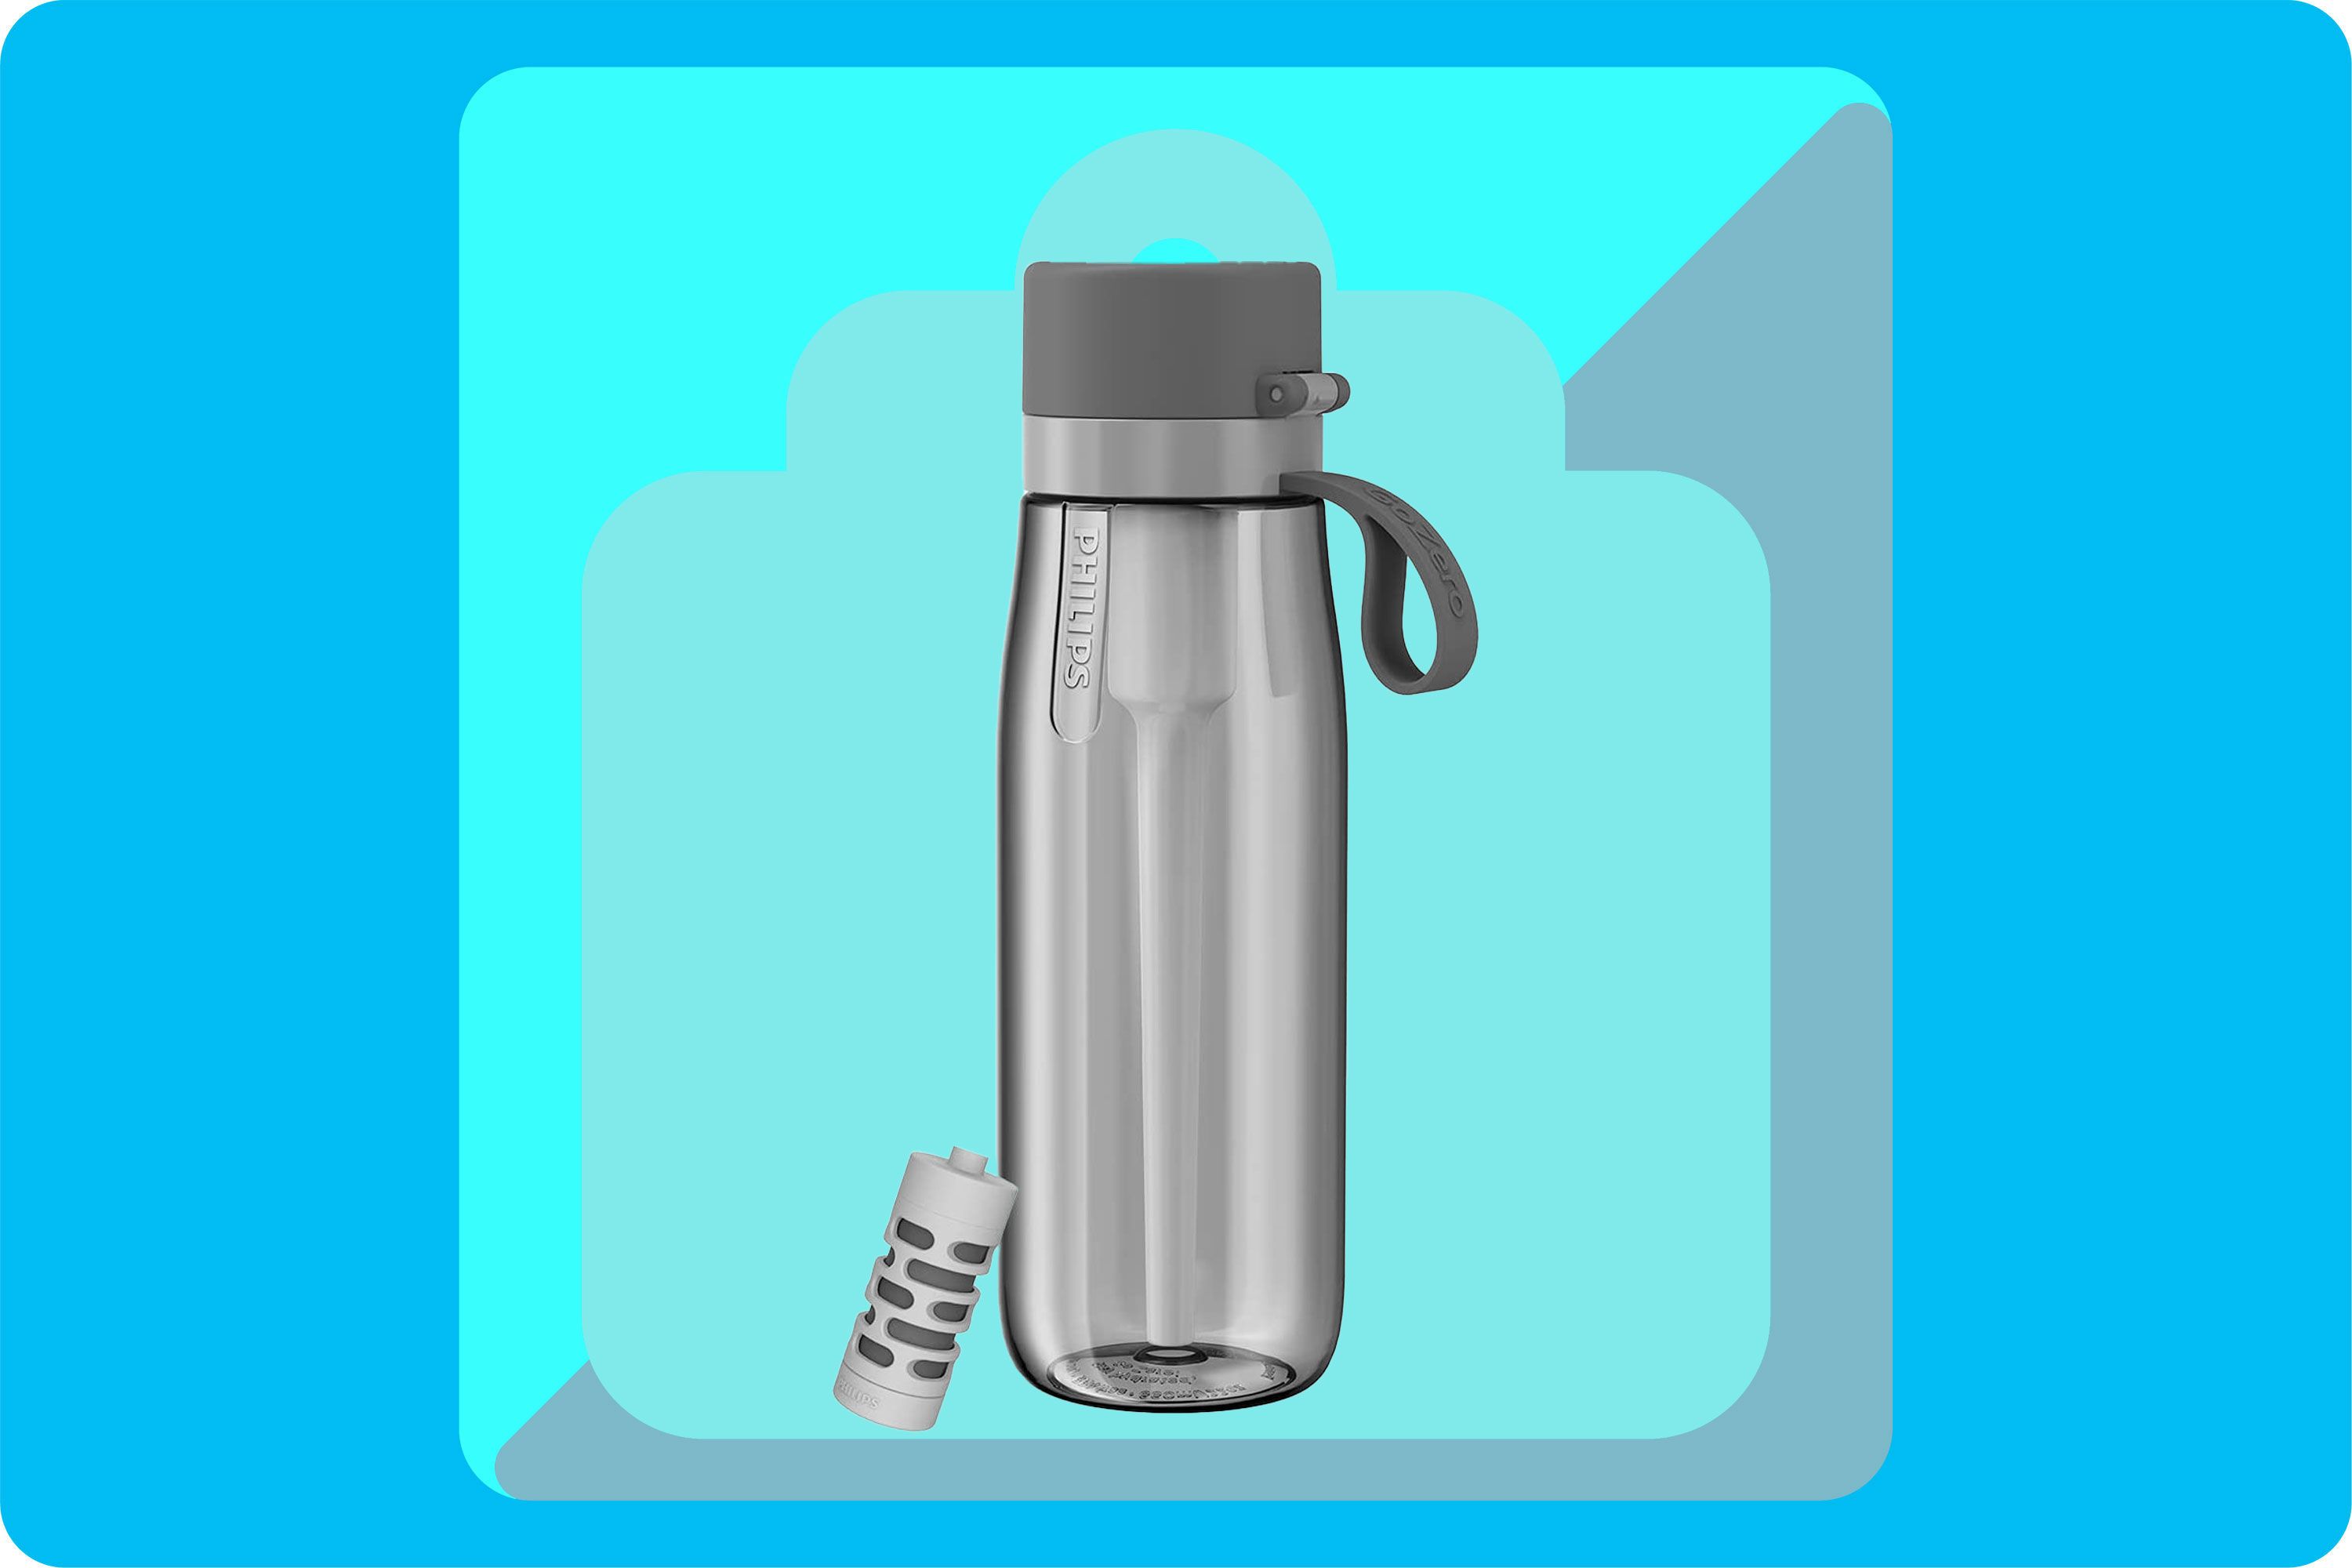 GoZero Insulated Stainless Steel Filter Water Bottle - Stay Hydrated